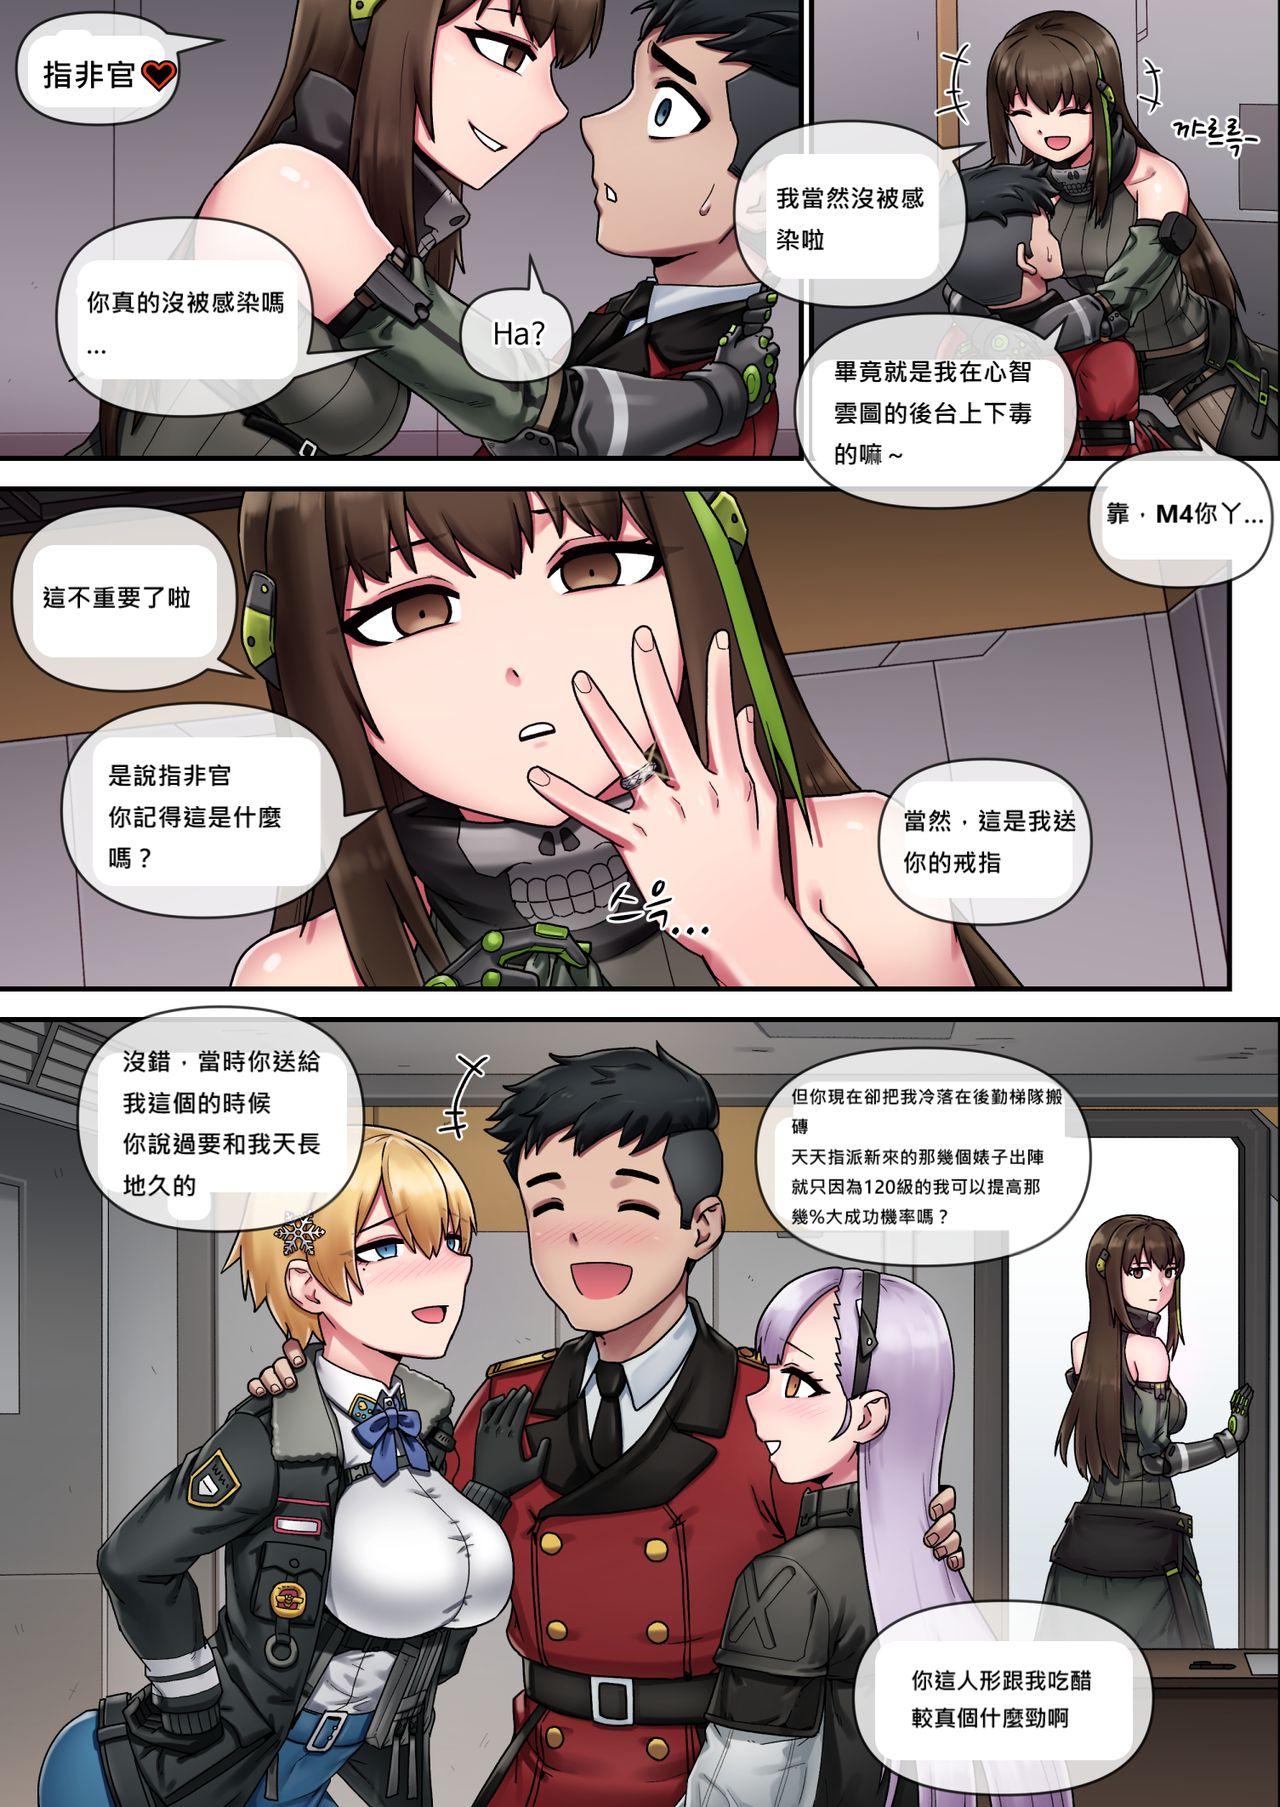 Oral Sex My Only Princess - Girls frontline Boob - Page 8